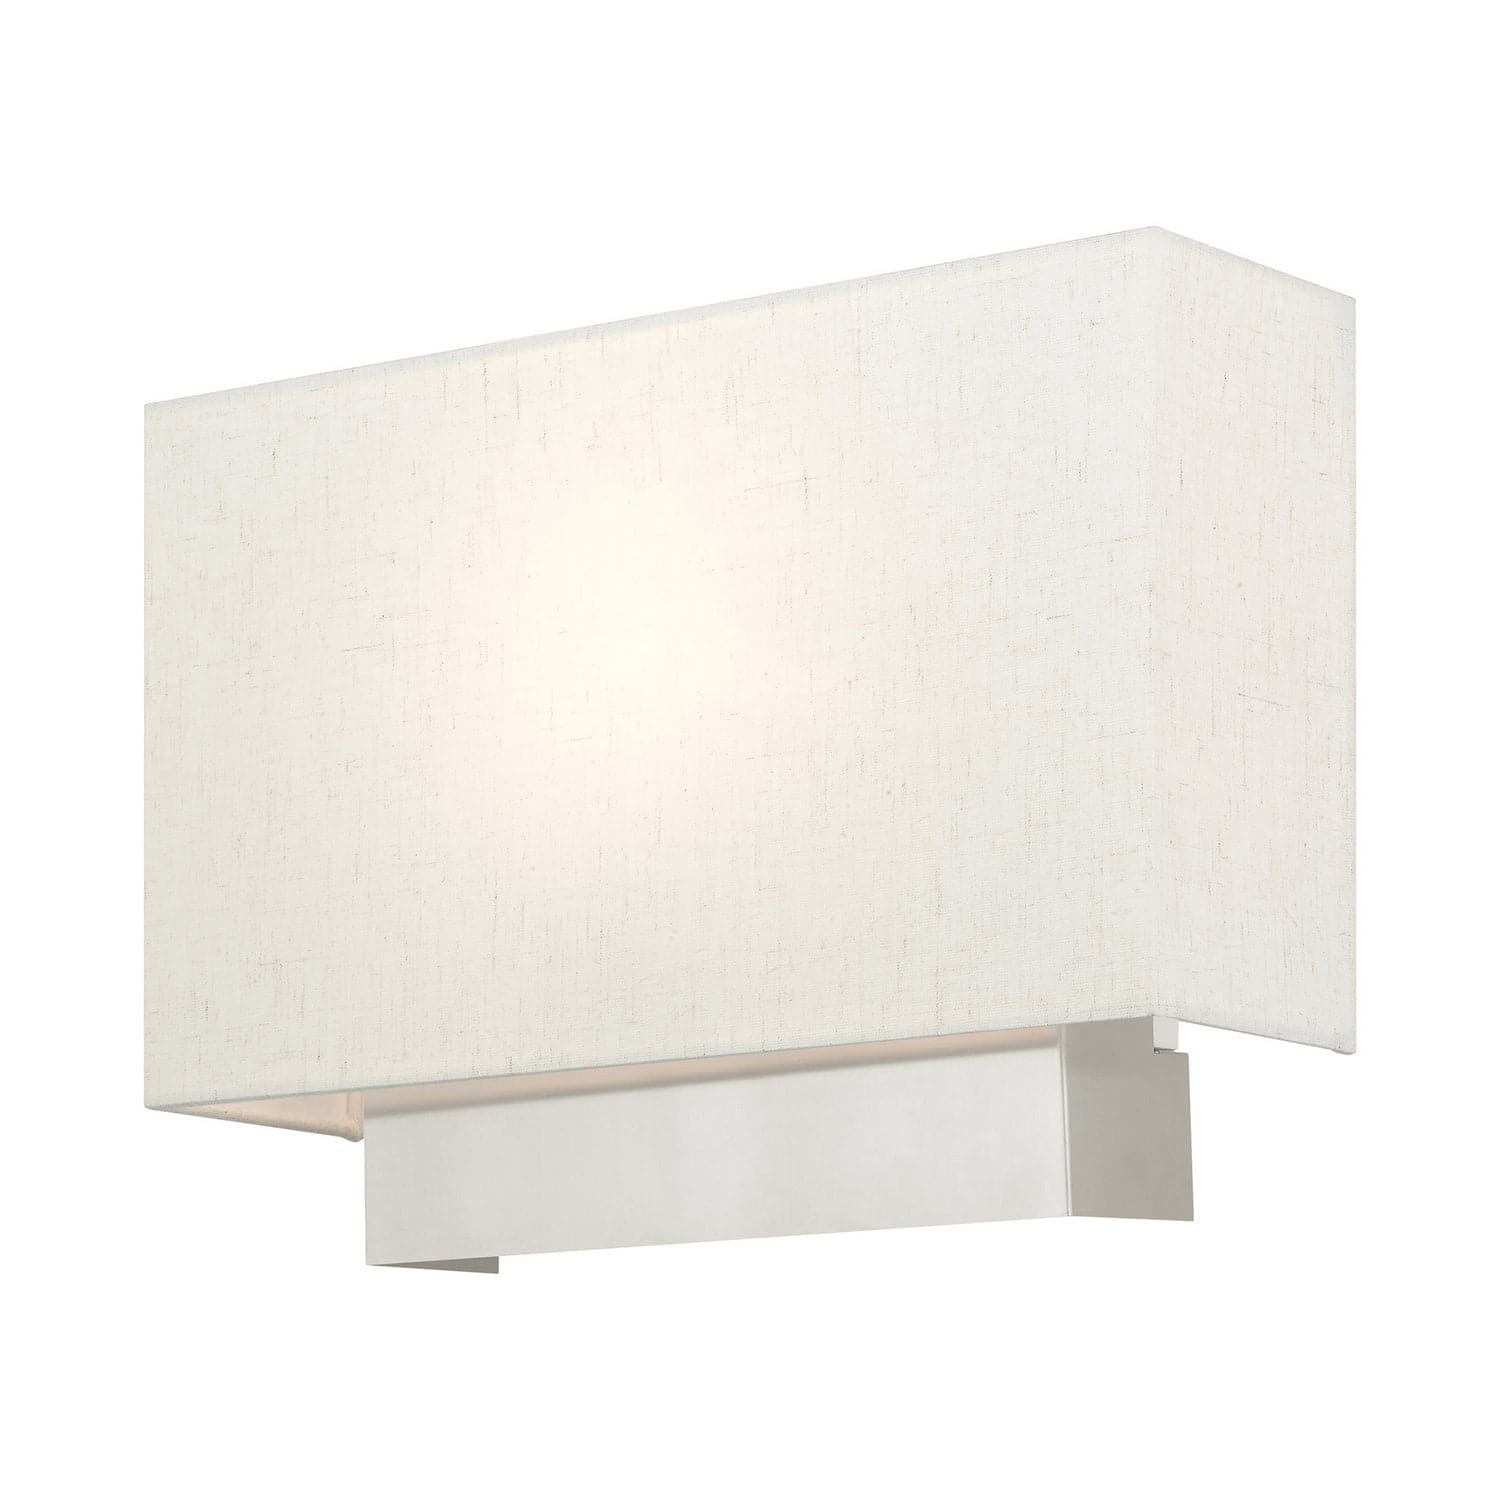 Livex Lighting - 49801-91 - One Light Wall Sconce - ADA Wall Sconces - Brushed Nickel